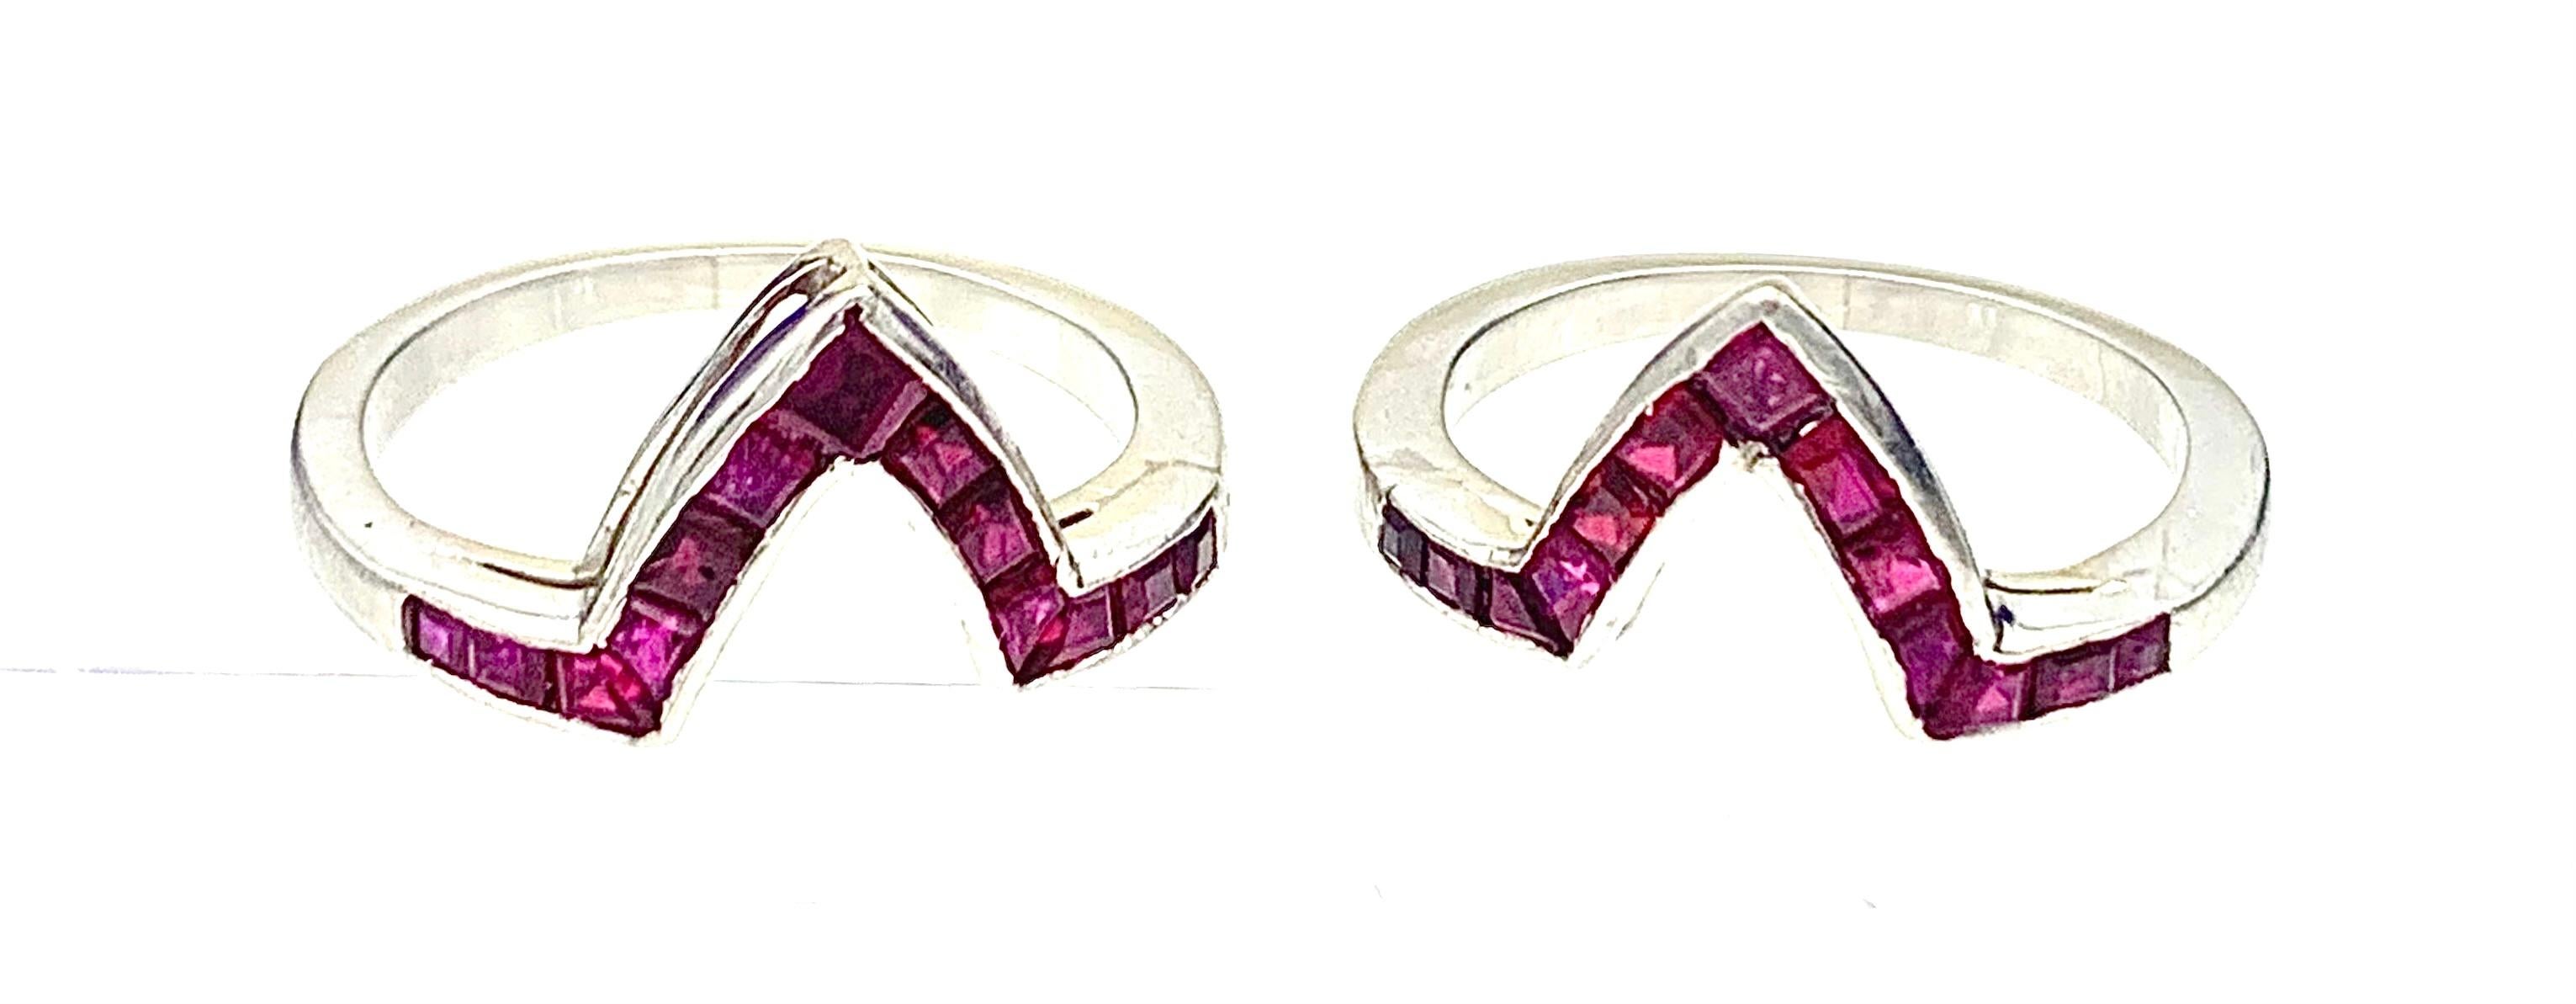 This unusual pair ruby and platinum rings was made in 1920ca. Each ring is made out of platinum and set with rectangular and square calibré cut rubies.  The rings can be worn as a pair, depending which way they are worn there are two different